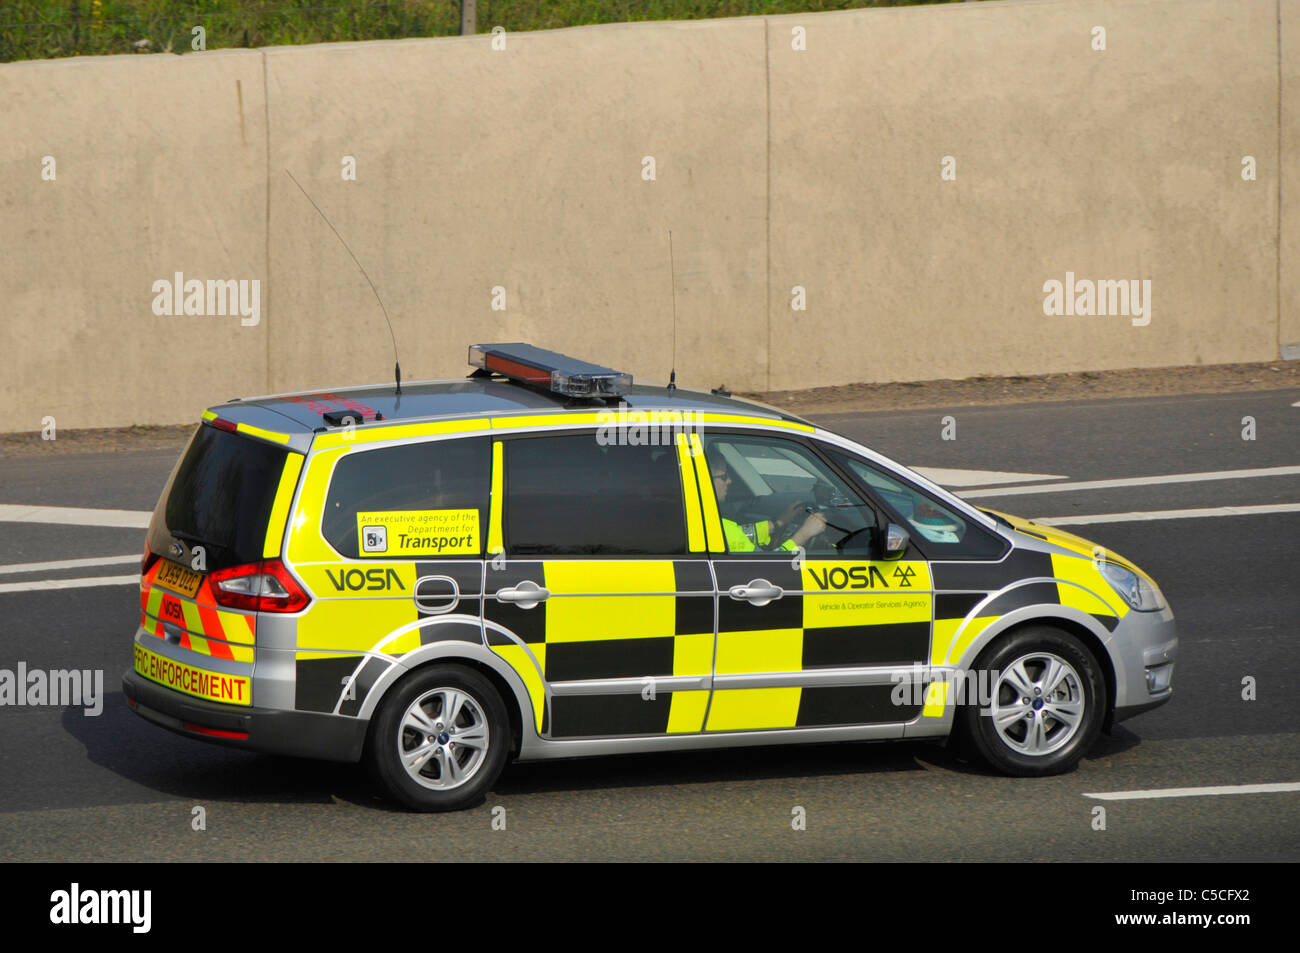 Vehicle & Operator Services Agency Traffic Enforcement Car an executive agency of the Department of Transport driving on M25 motorway Essex England UK Stock Photo